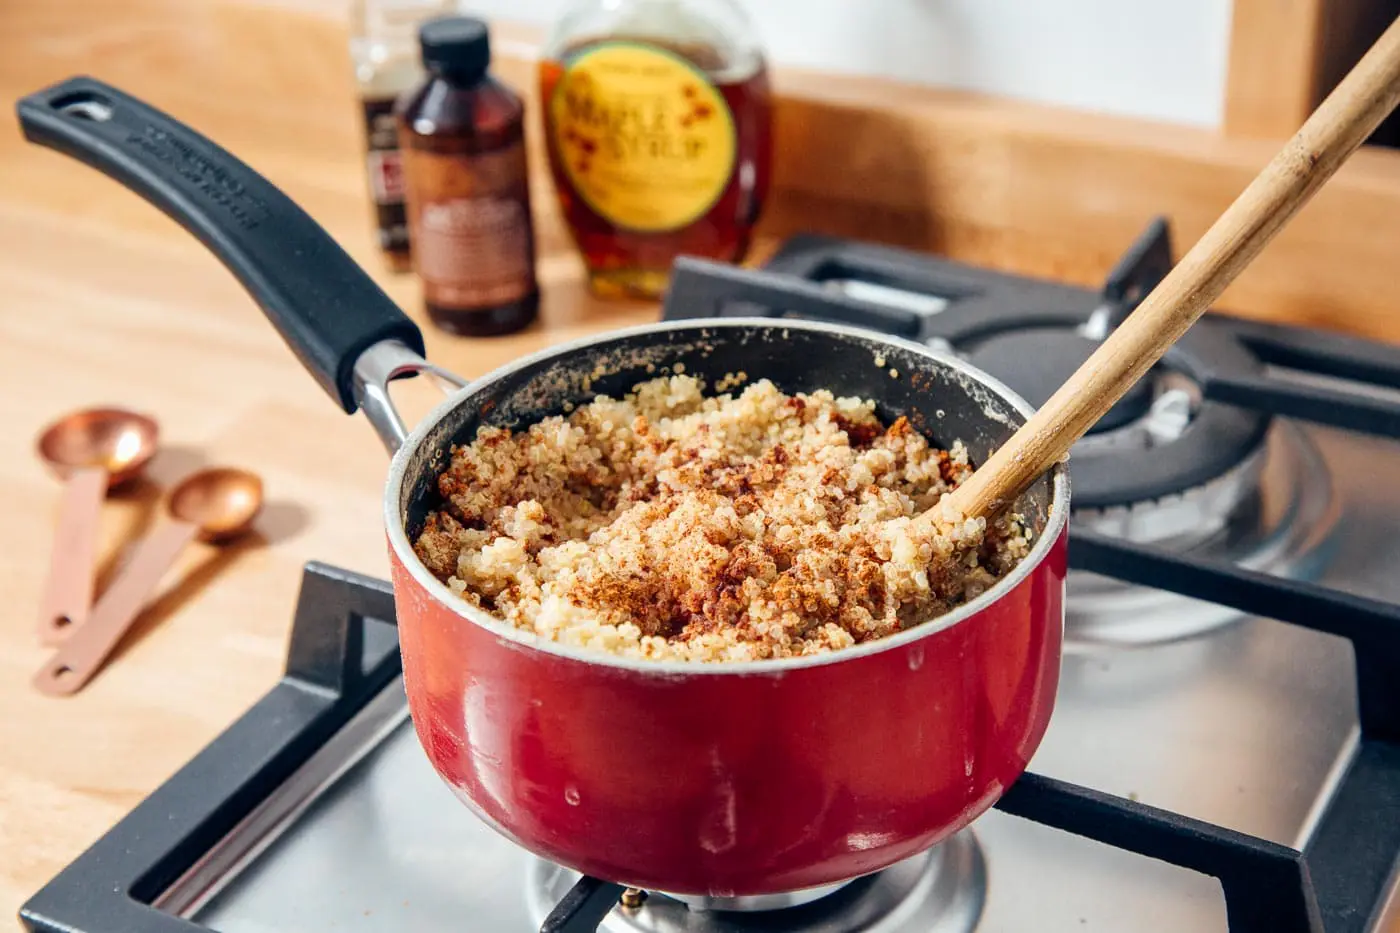 Quinoa cooking in a pot on a stove